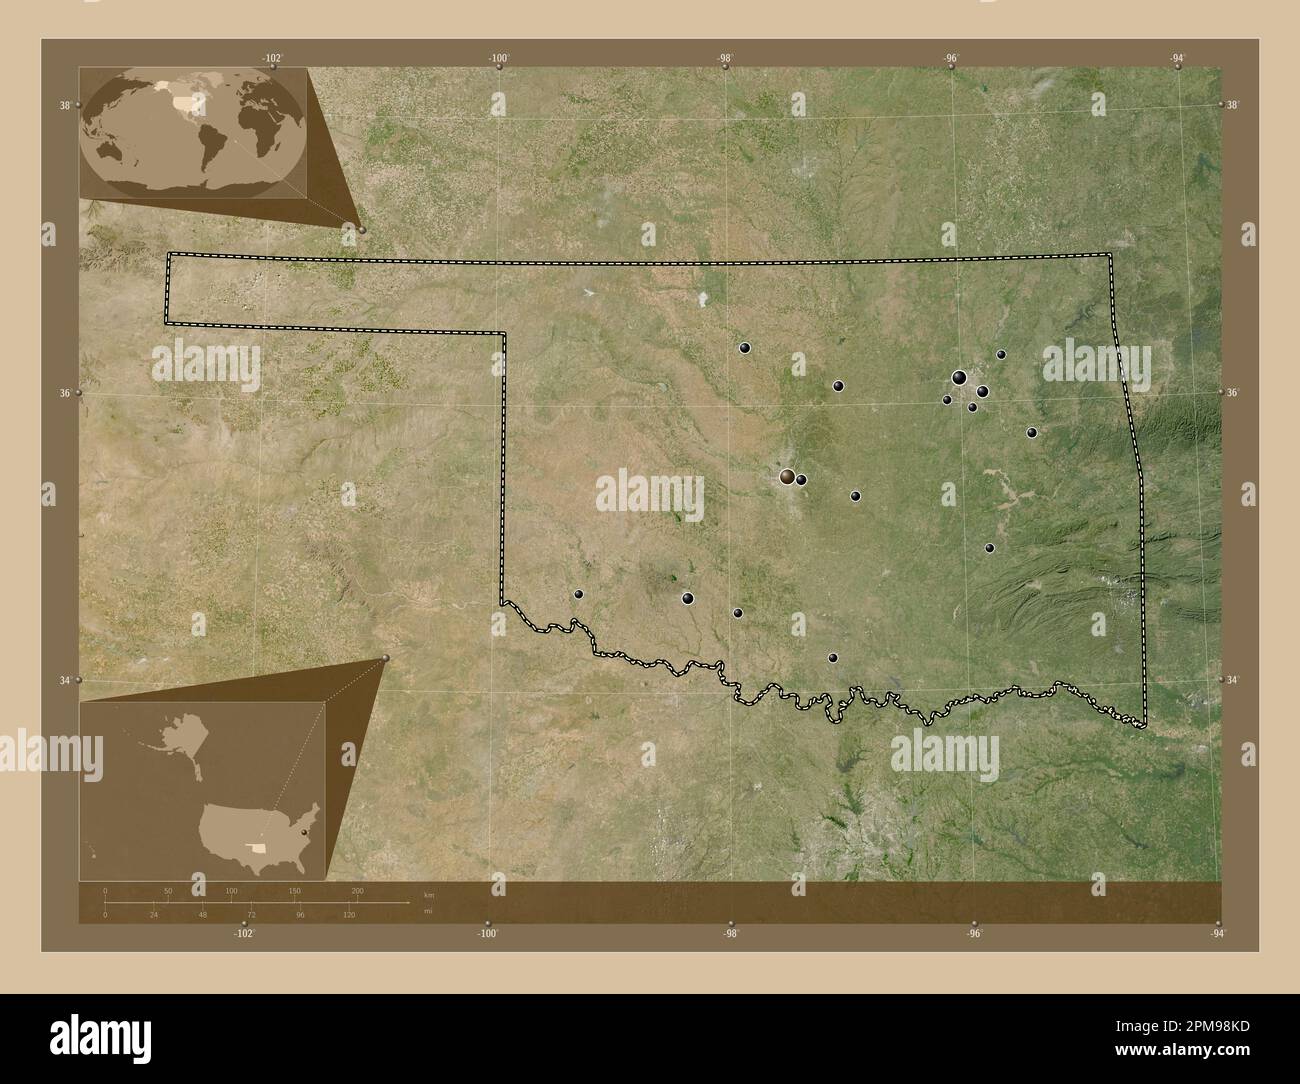 Oklahoma, state of United States of America. Low resolution satellite map. Locations of major cities of the region. Corner auxiliary location maps Stock Photo